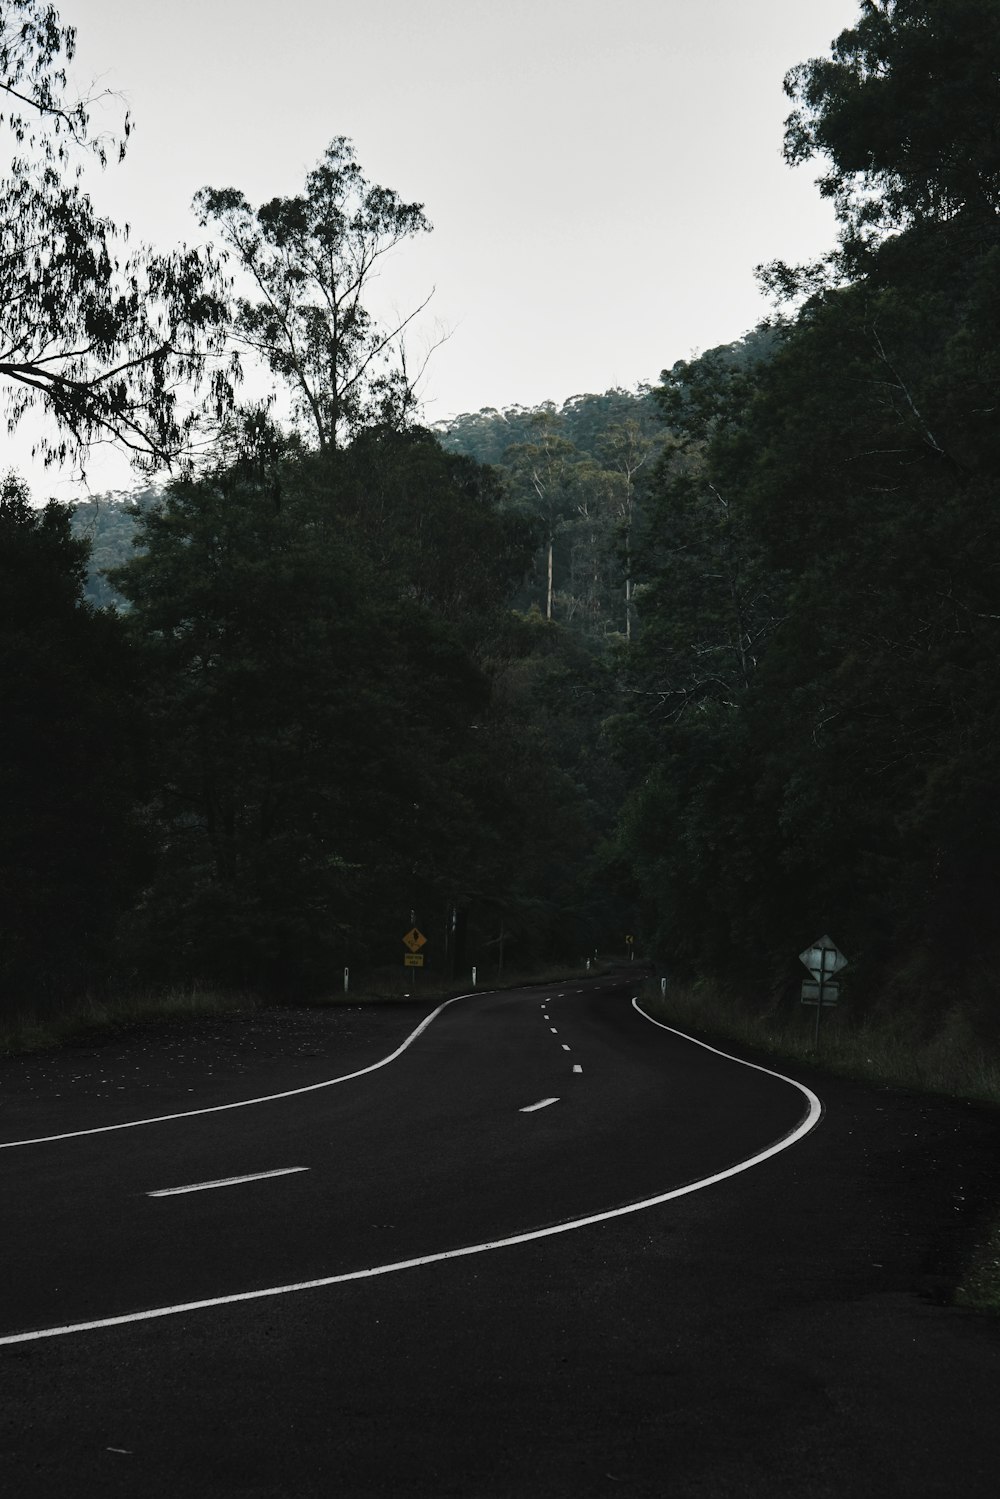 a curve in the road with trees in the background